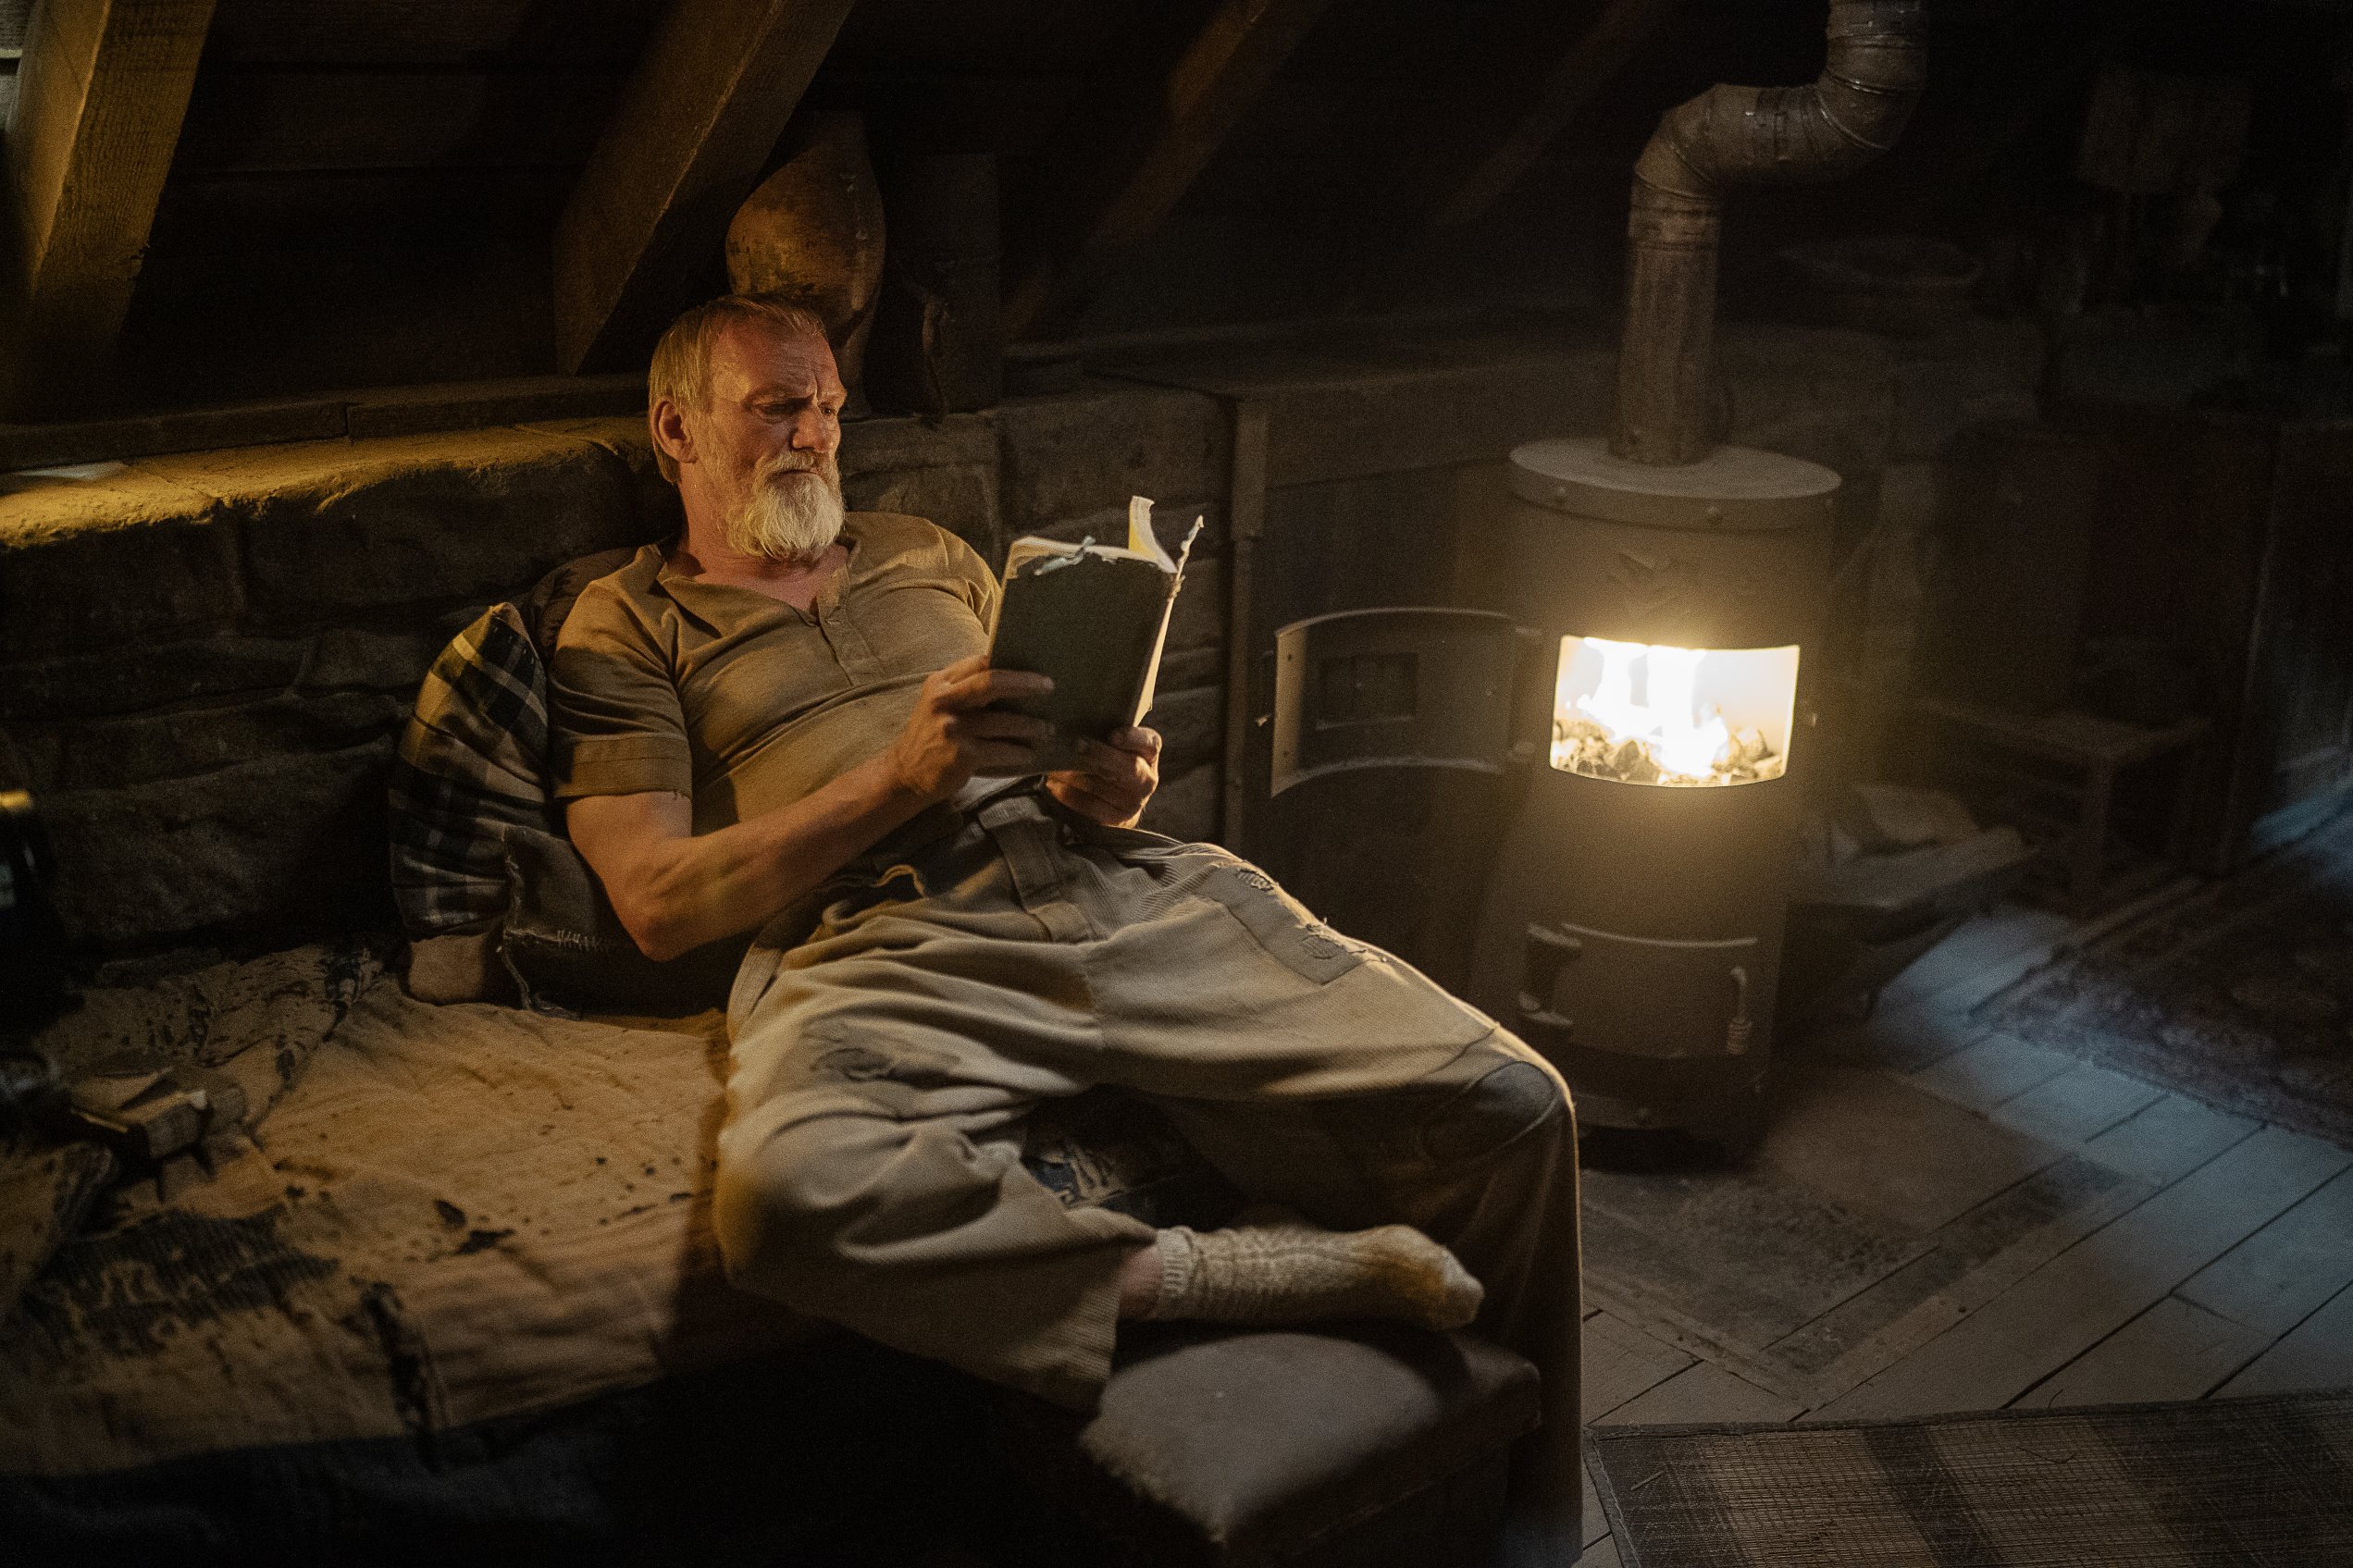 Image of Ingvar Sigurðsson reclining on an old sofa, reading by an open fire. A scene from Rebel Moon TV series